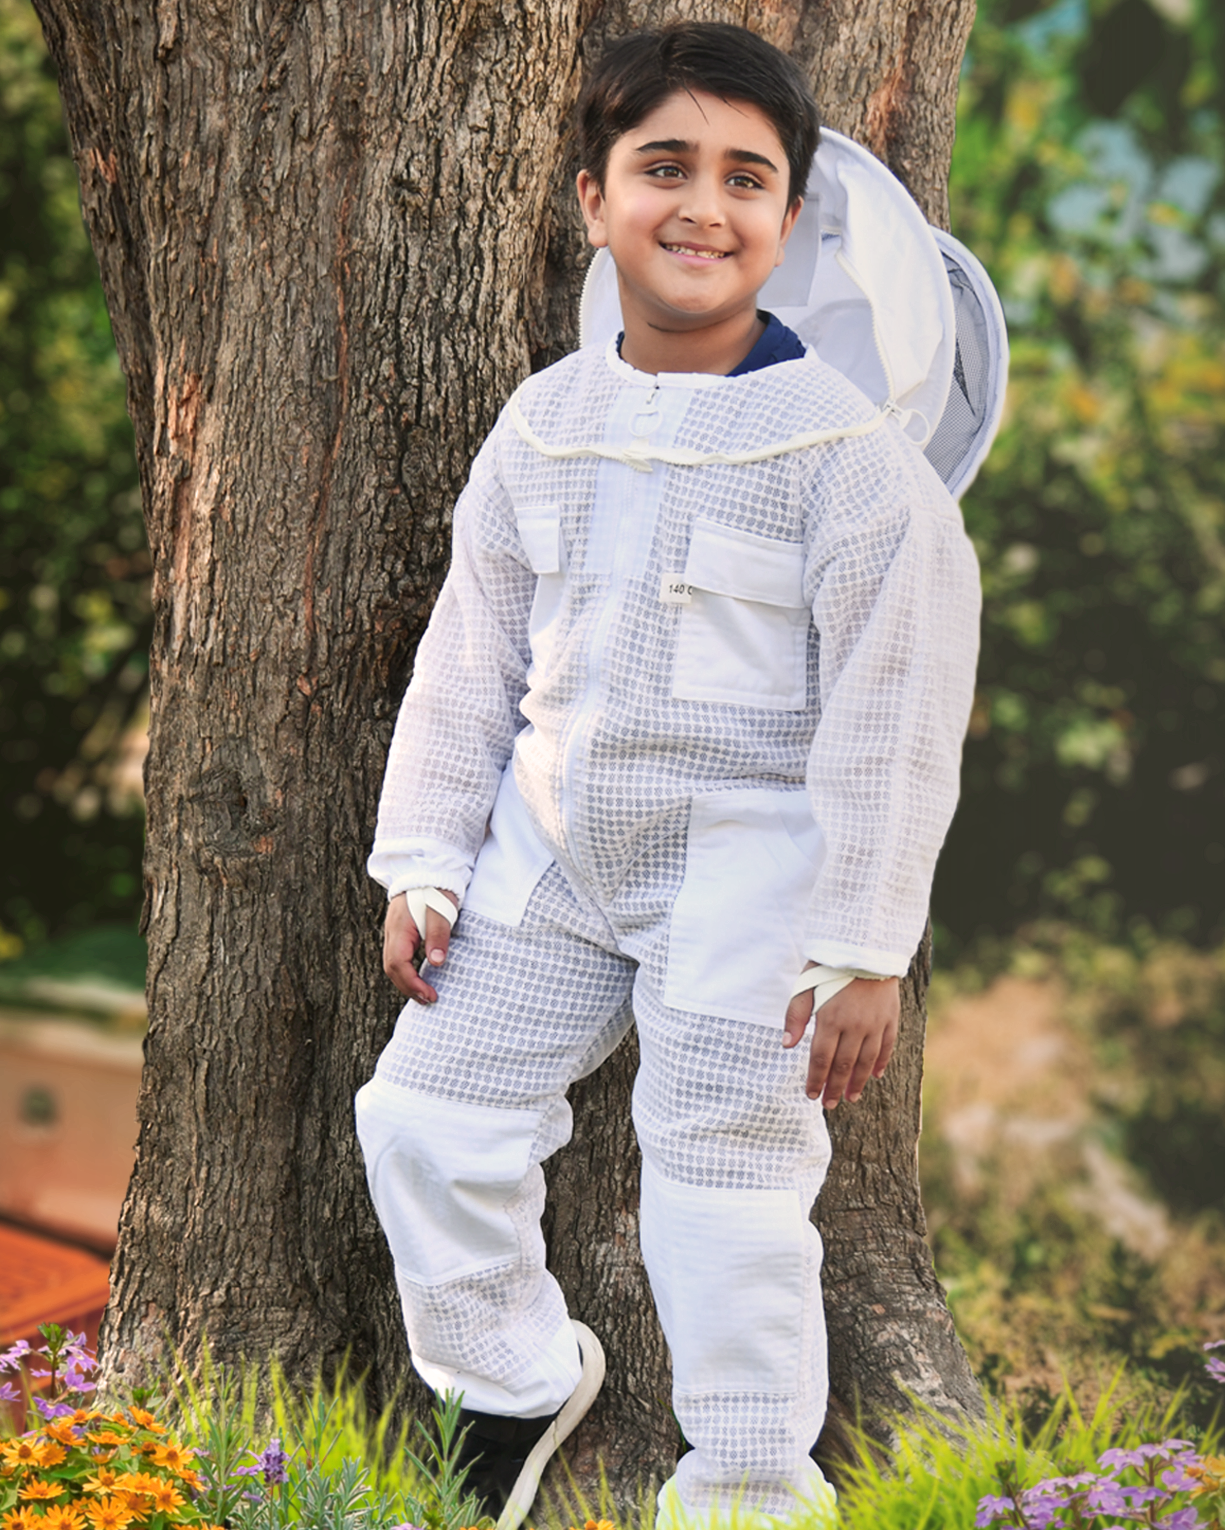 A Kid also wearing a beekeeping suit